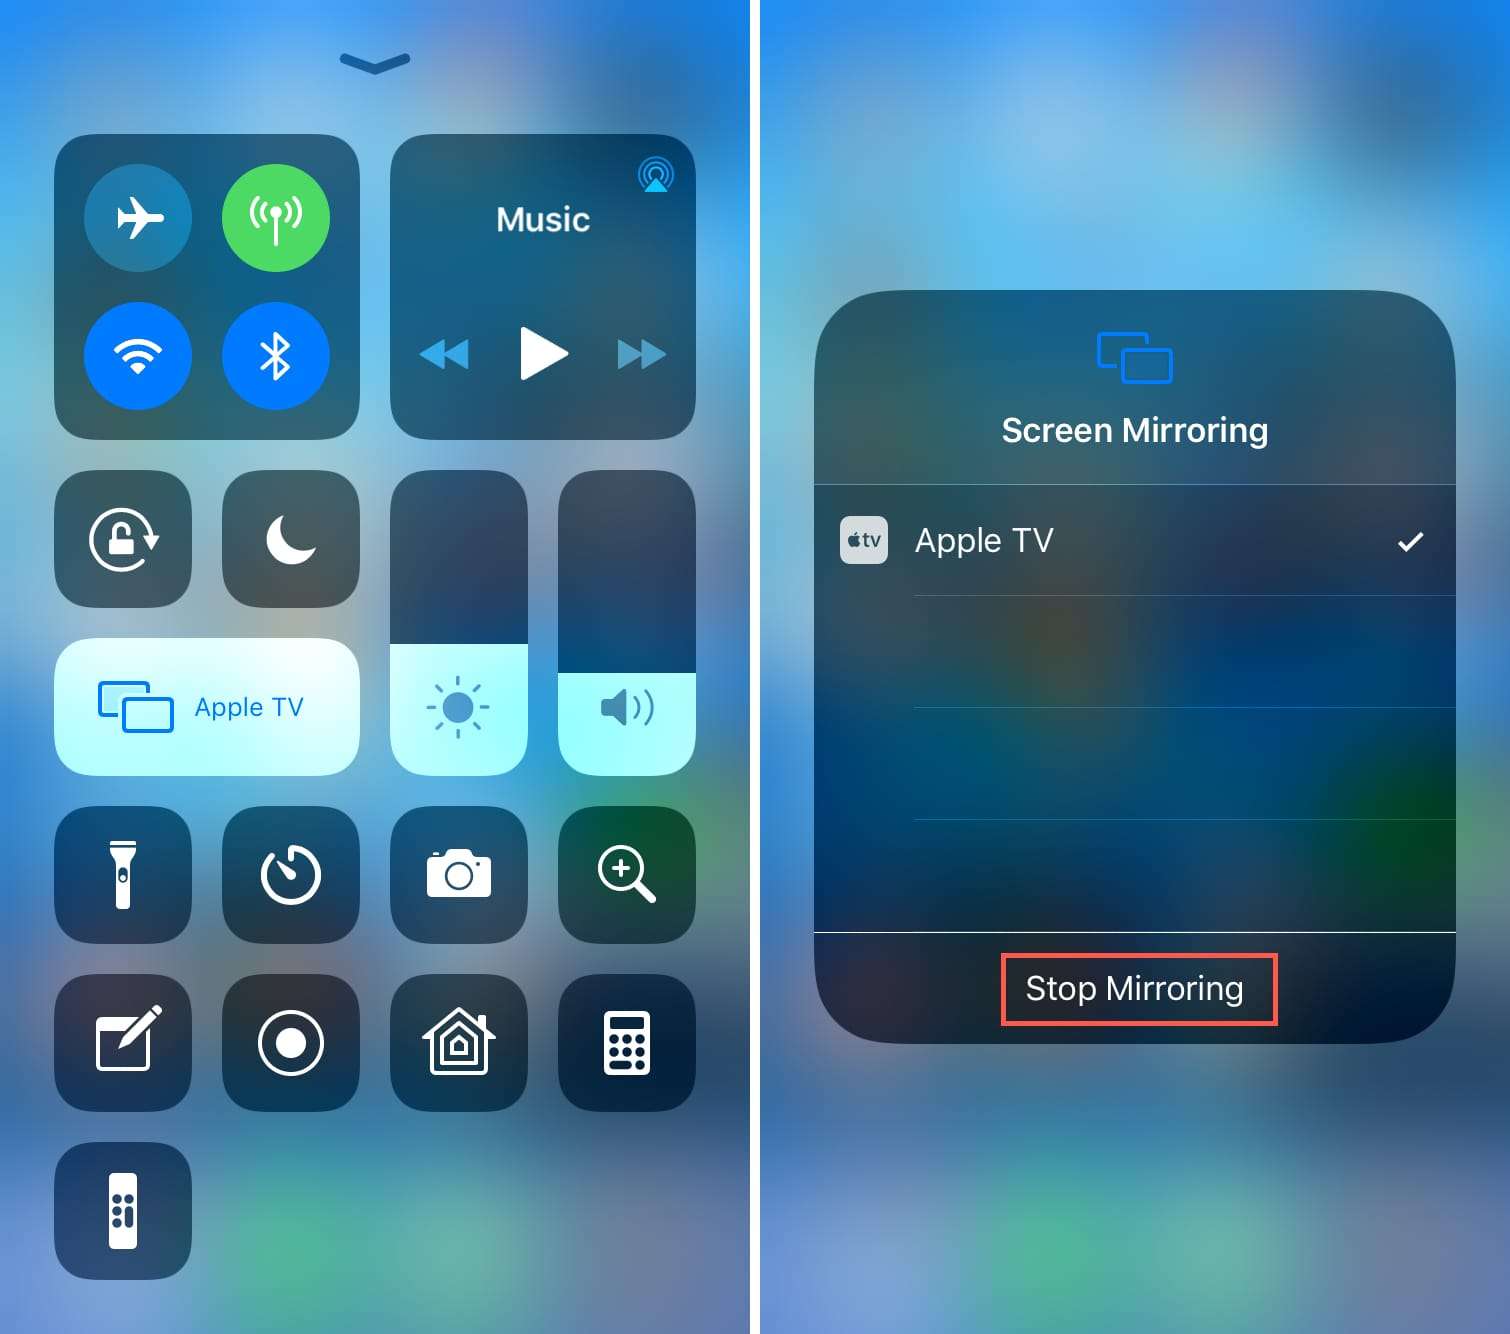 How to AirPlay or mirror your iPhone or iPad display to Apple TV